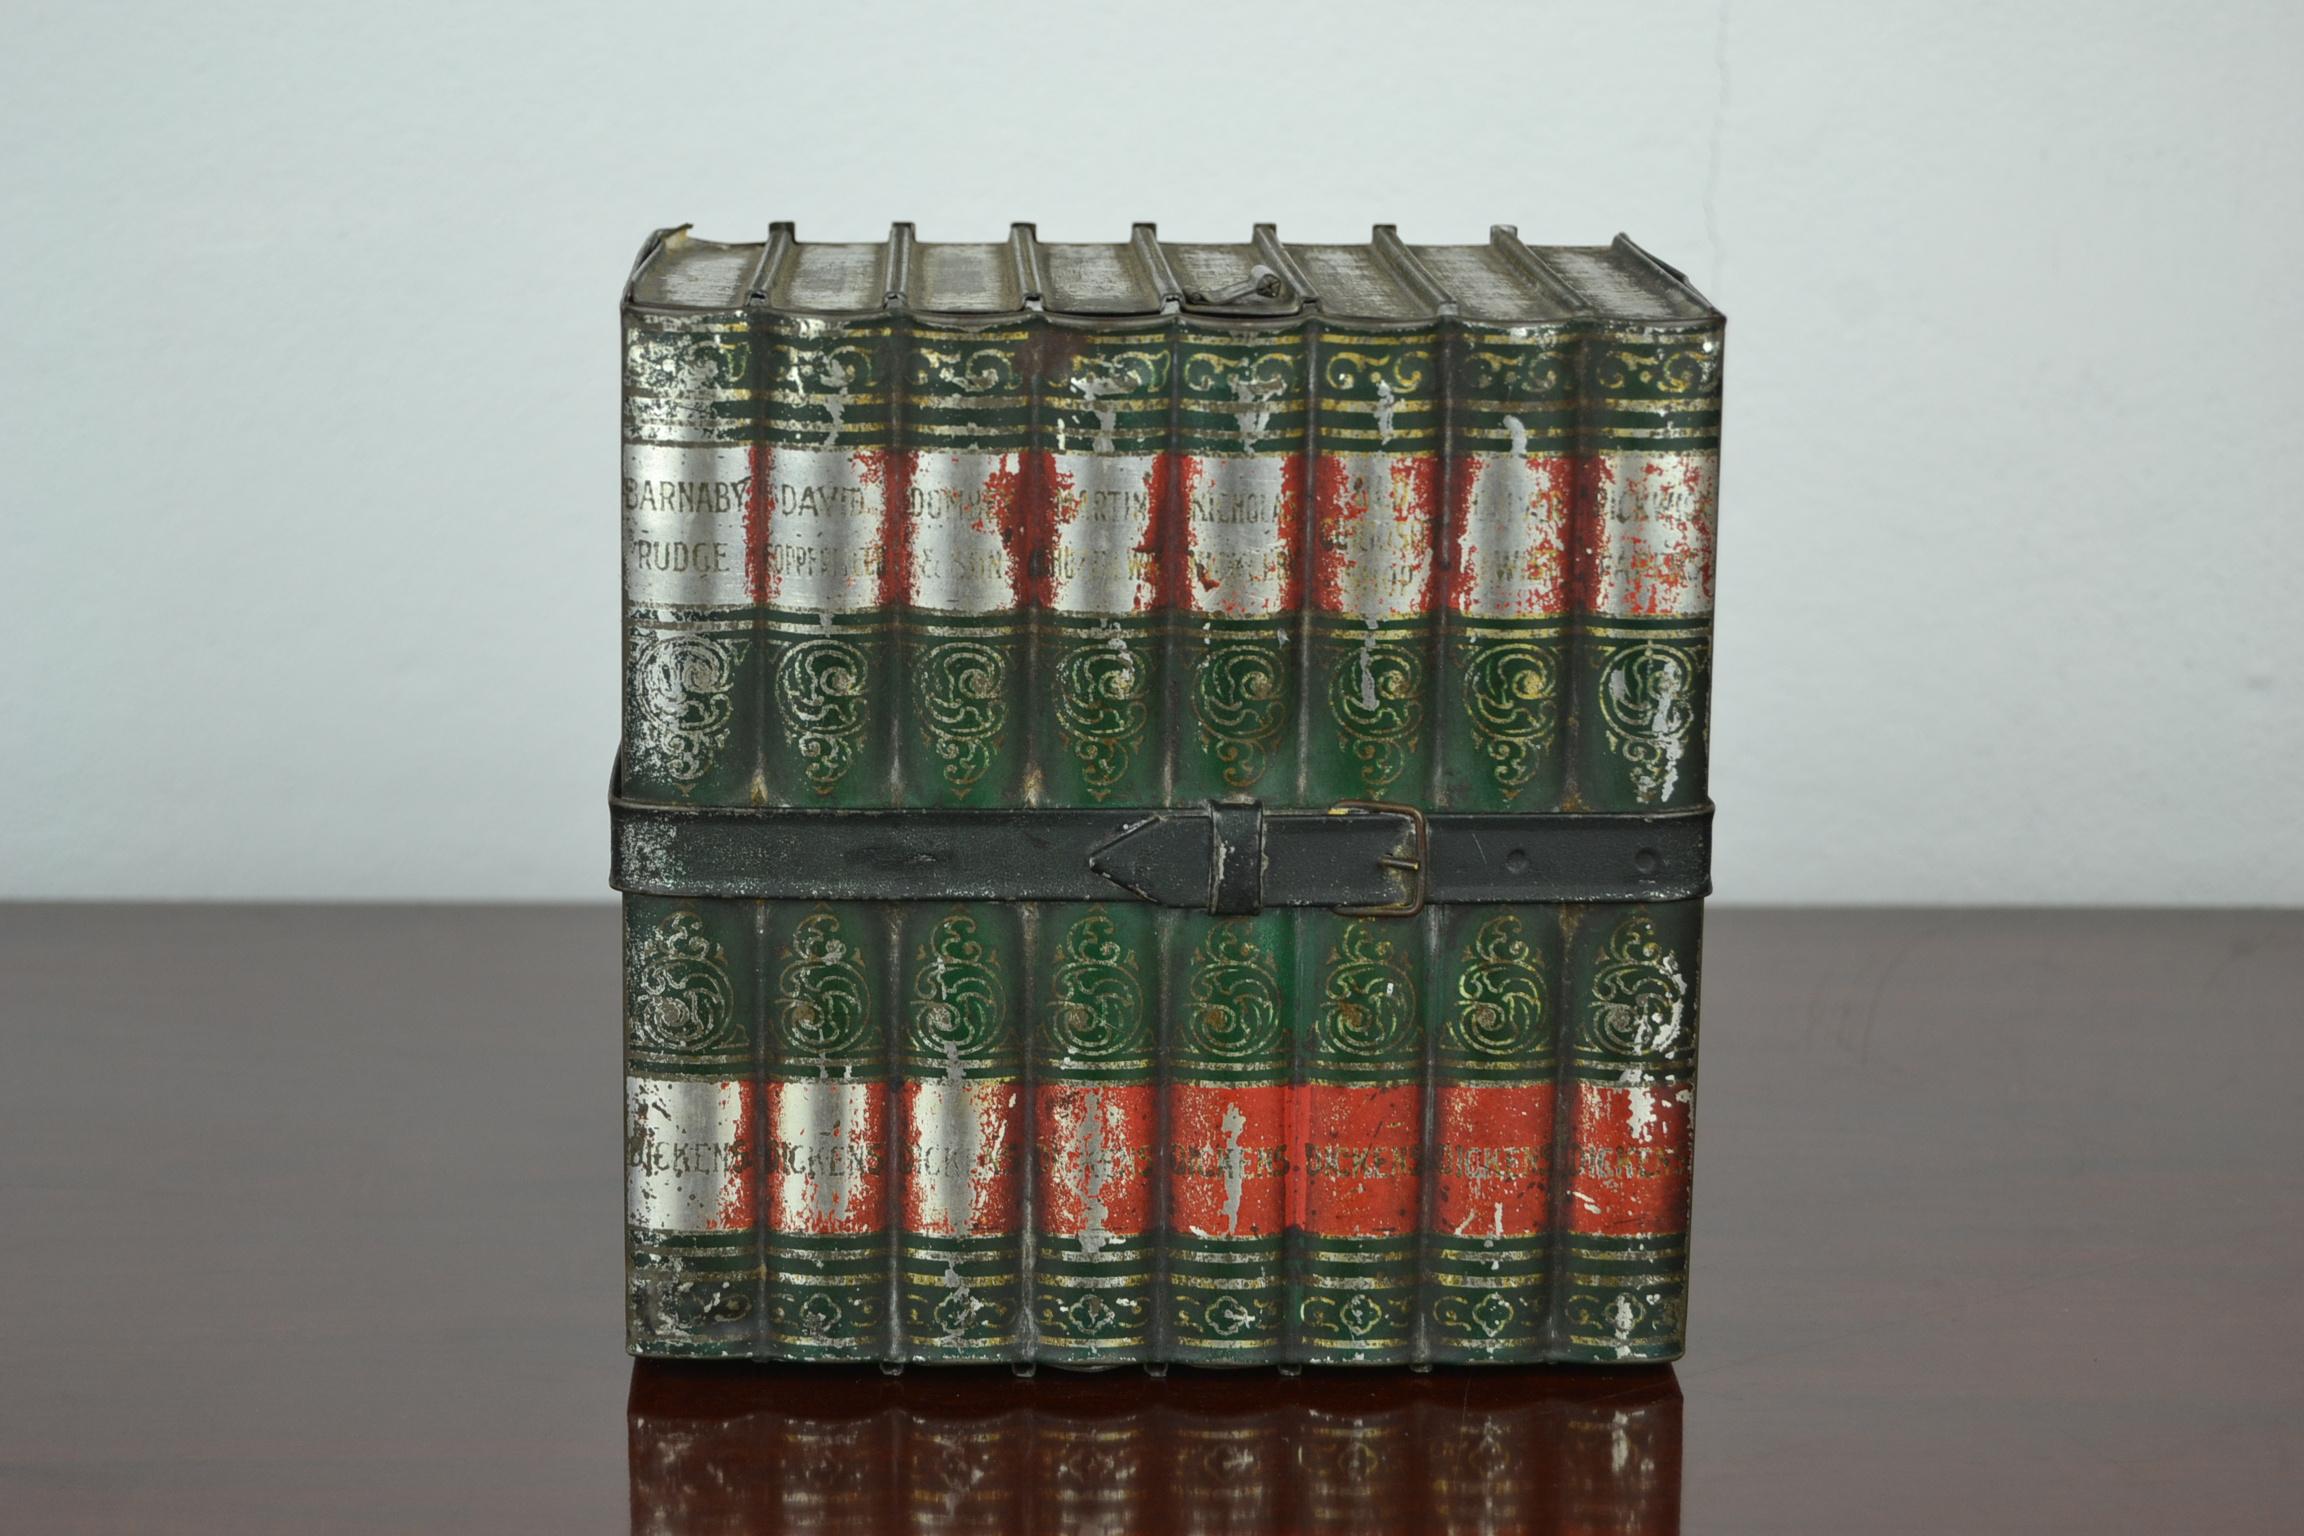 Early 1900 Antique lithographic Tin Box  from Huntley and Palmers  - Modelled as Eight Leather Bound Books - Librabry books - Dickens Serie Tin Biscuit Box.

This British biscuit Tin looks like real librabry Books bounded with a leather strap.
The